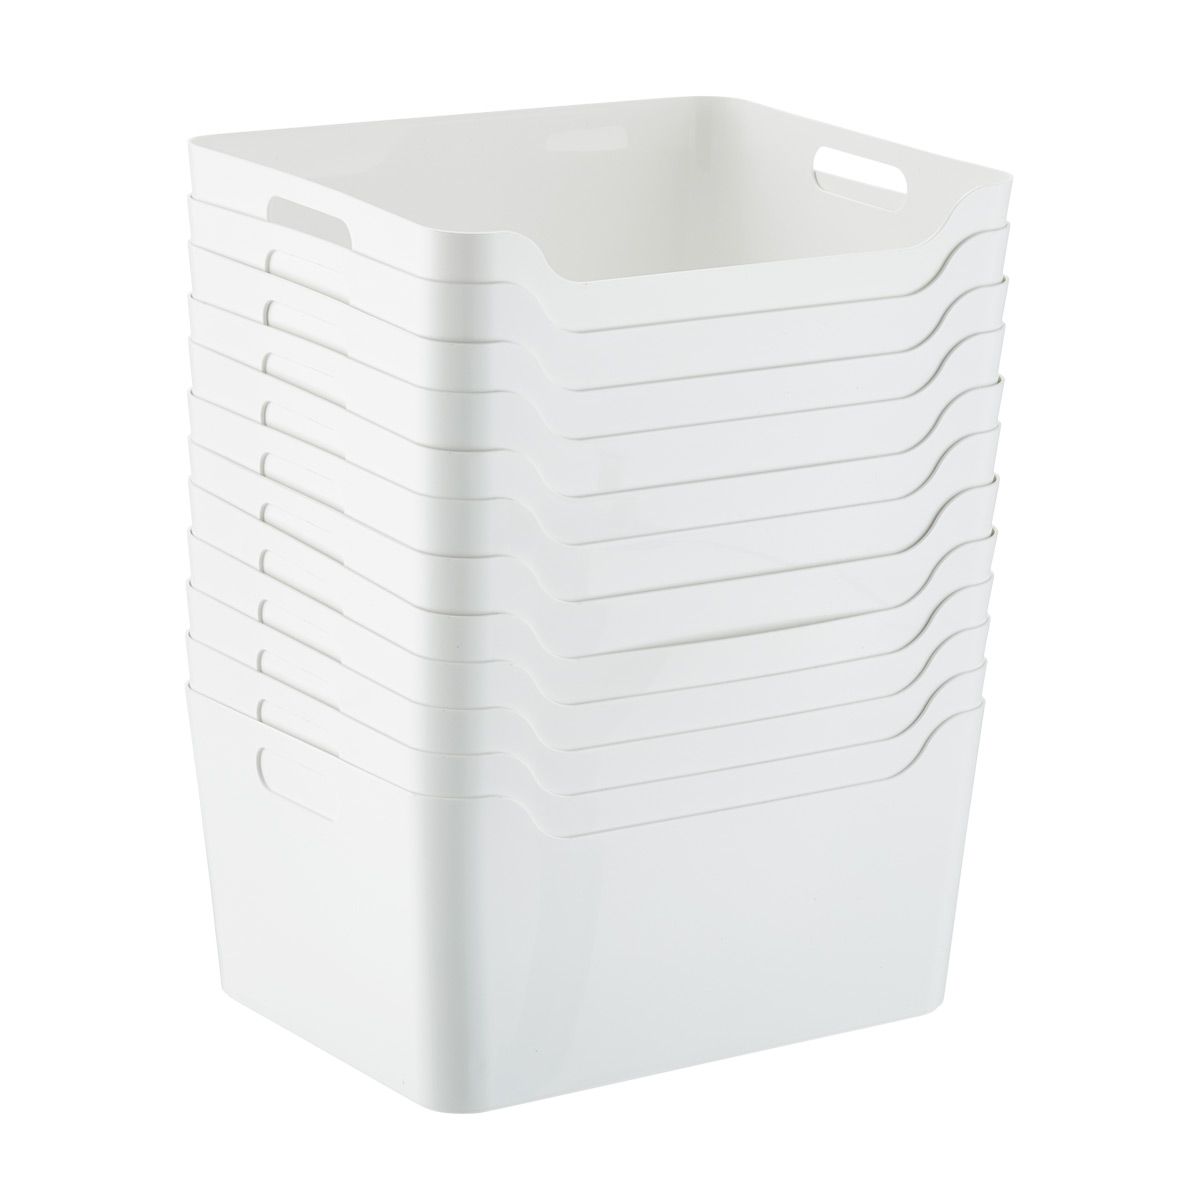 Large Plastic Bins w/ Handles | The Container Store